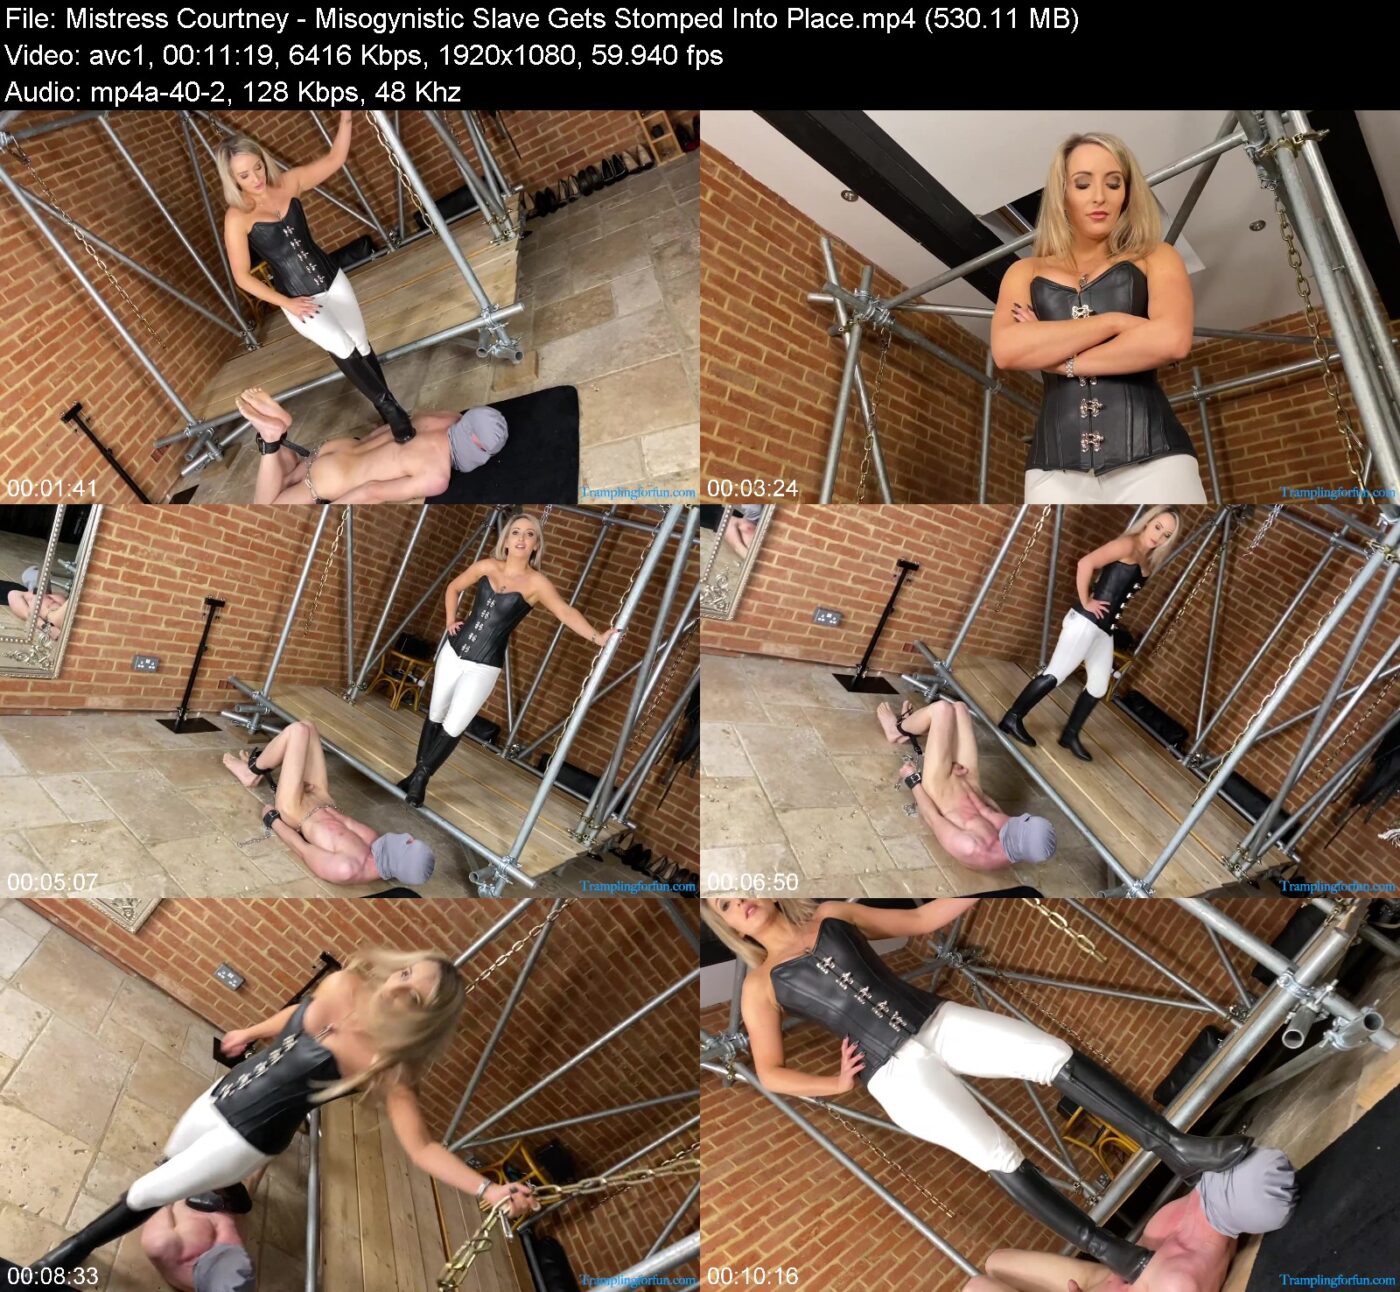 Mistress Courtney in Misogynistic Slave Gets Stomped Into Place